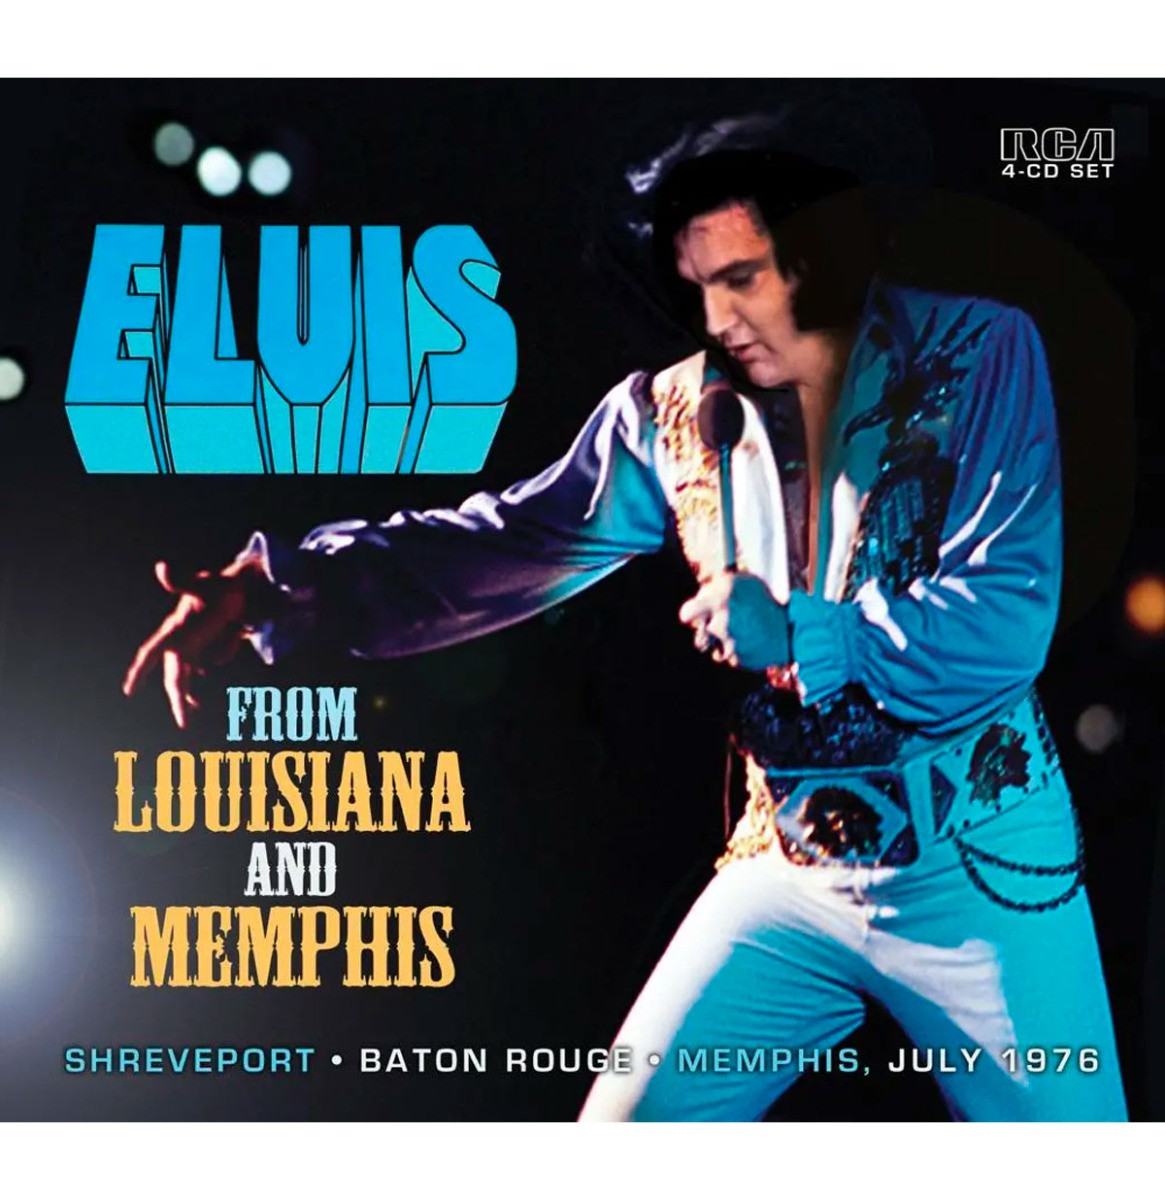 Elvis Presley - From Louisiana And Memphis 4CD - FTD Label